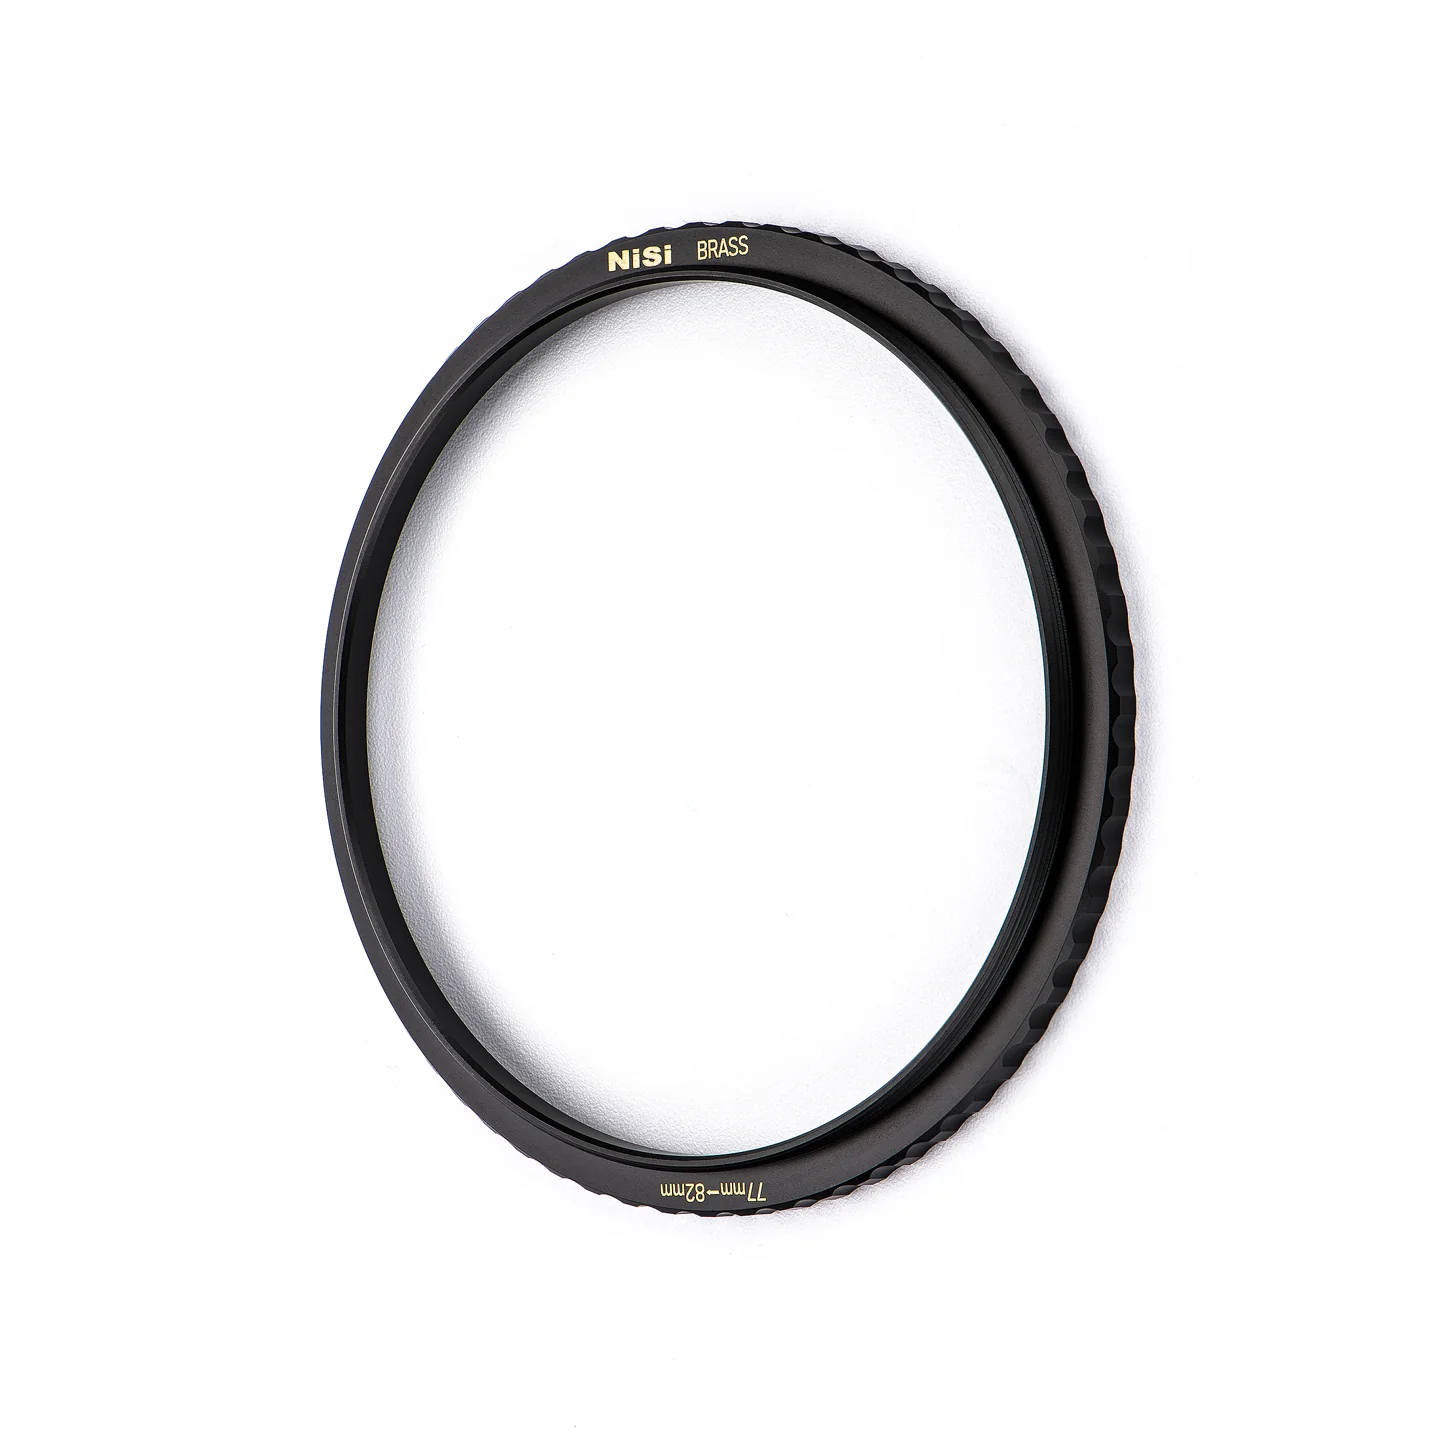 NiSi 77-82mm Brass Step Rings for Circular Filters